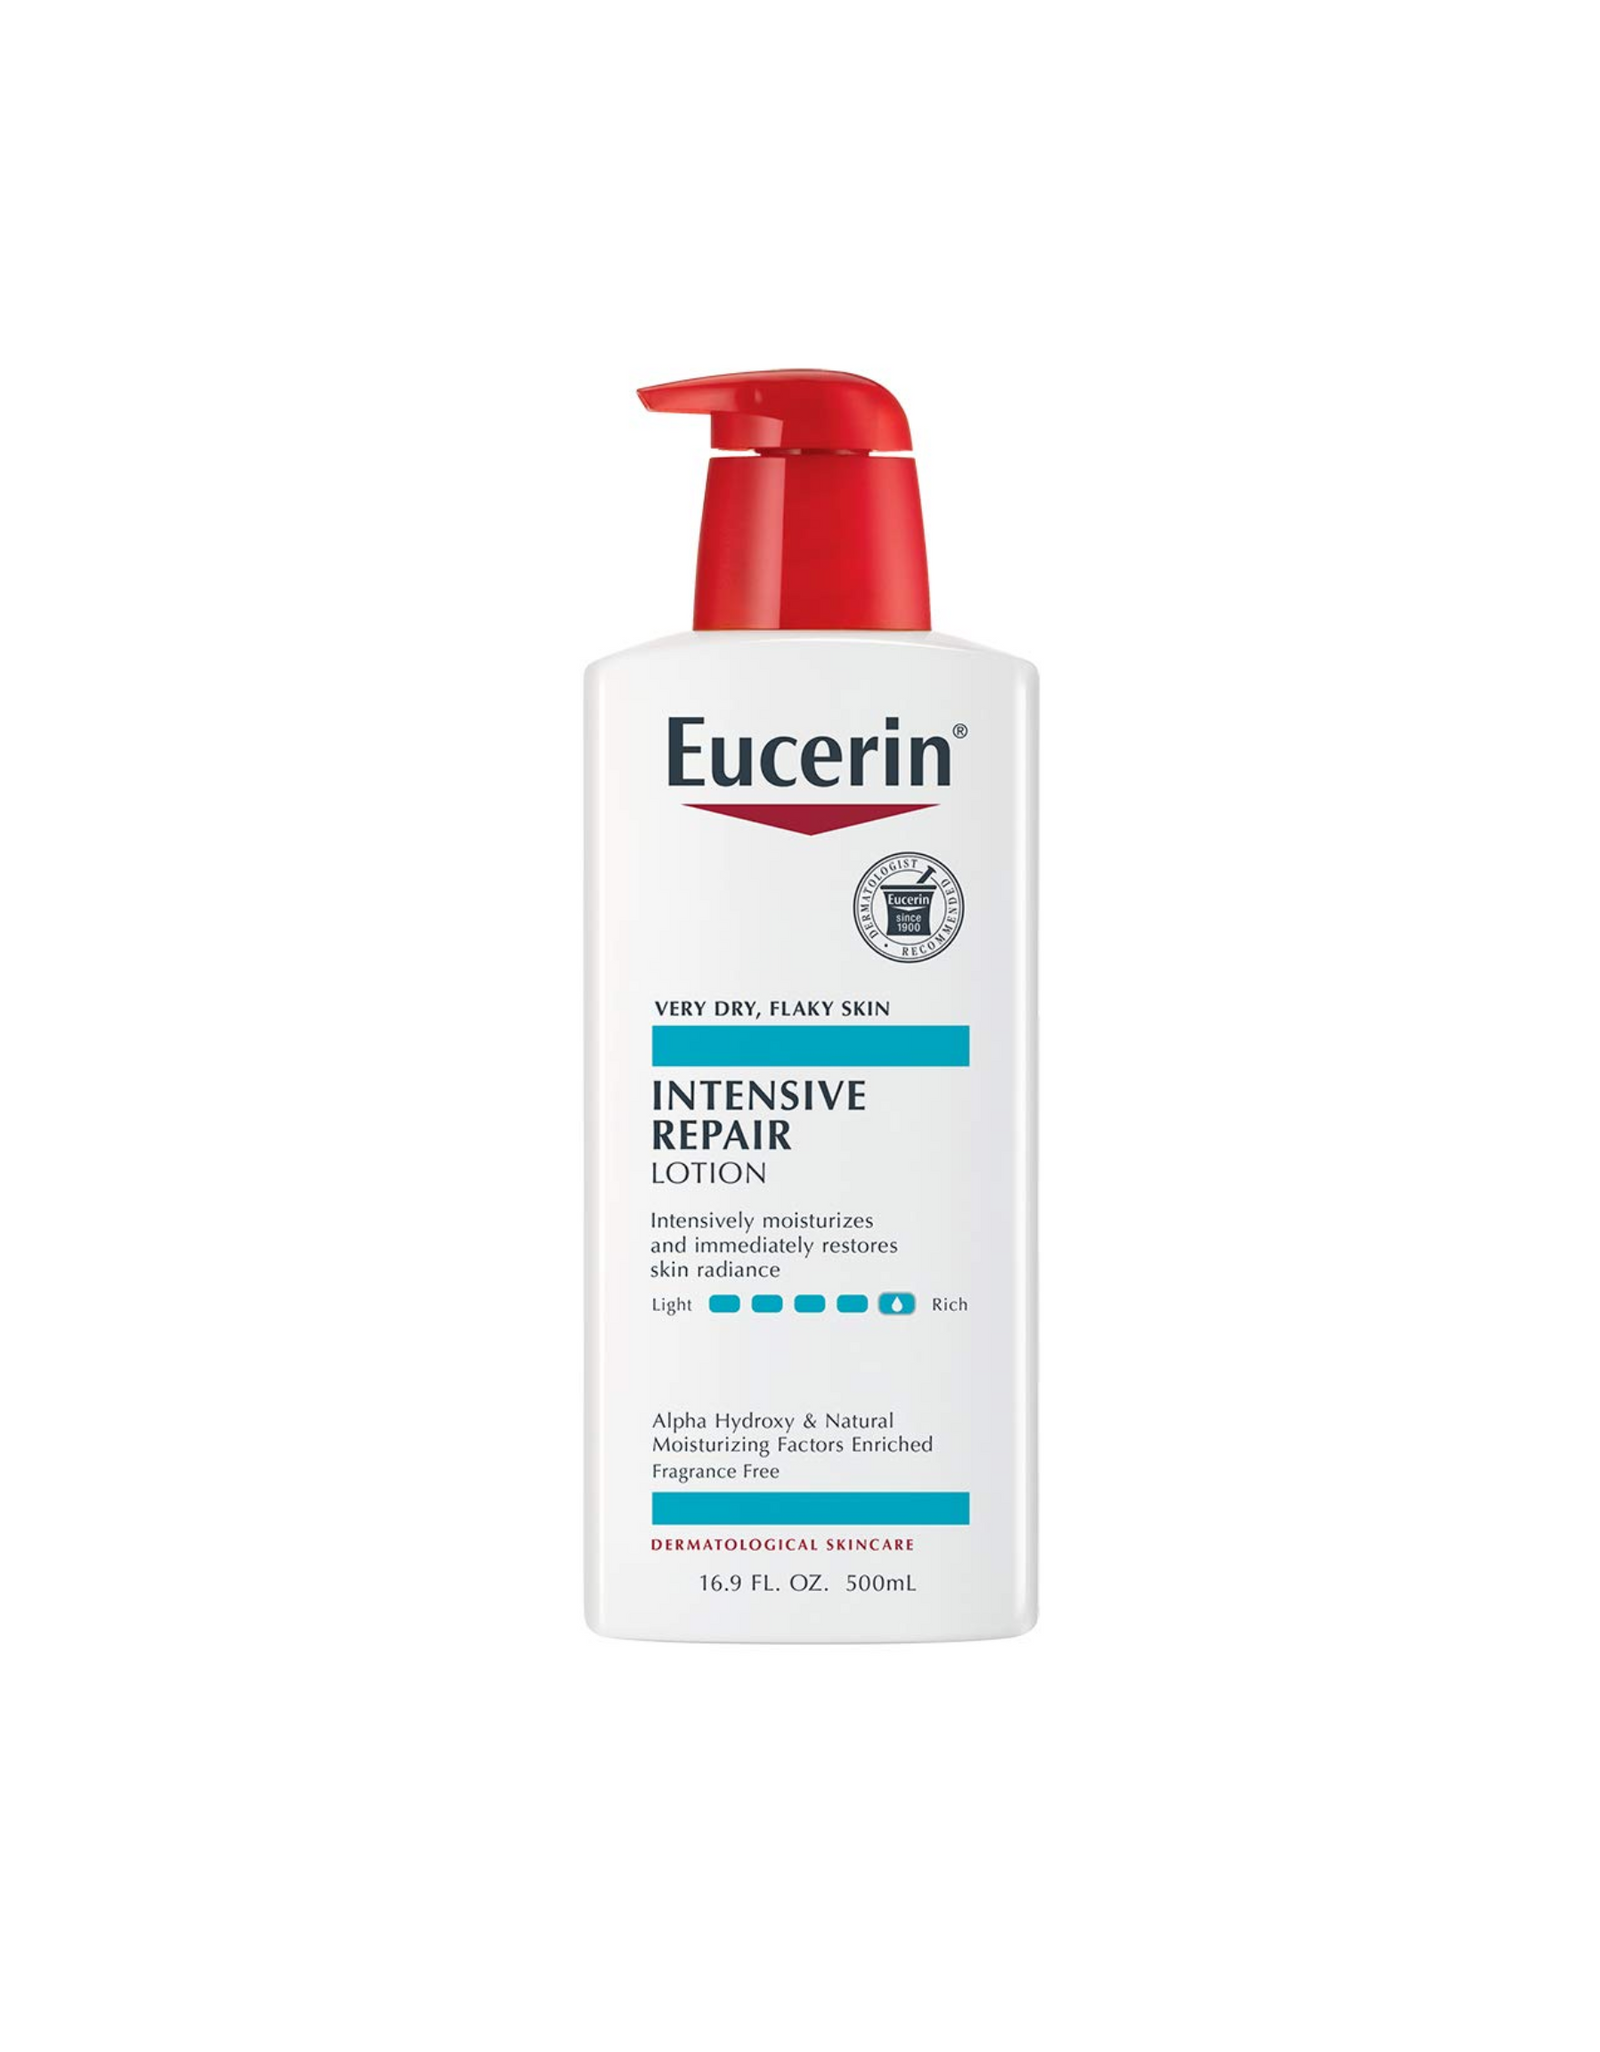 Eucerin Intensive Repair Body Lotion for Very Dry and Flaky Skin, 16.9 Fl Oz